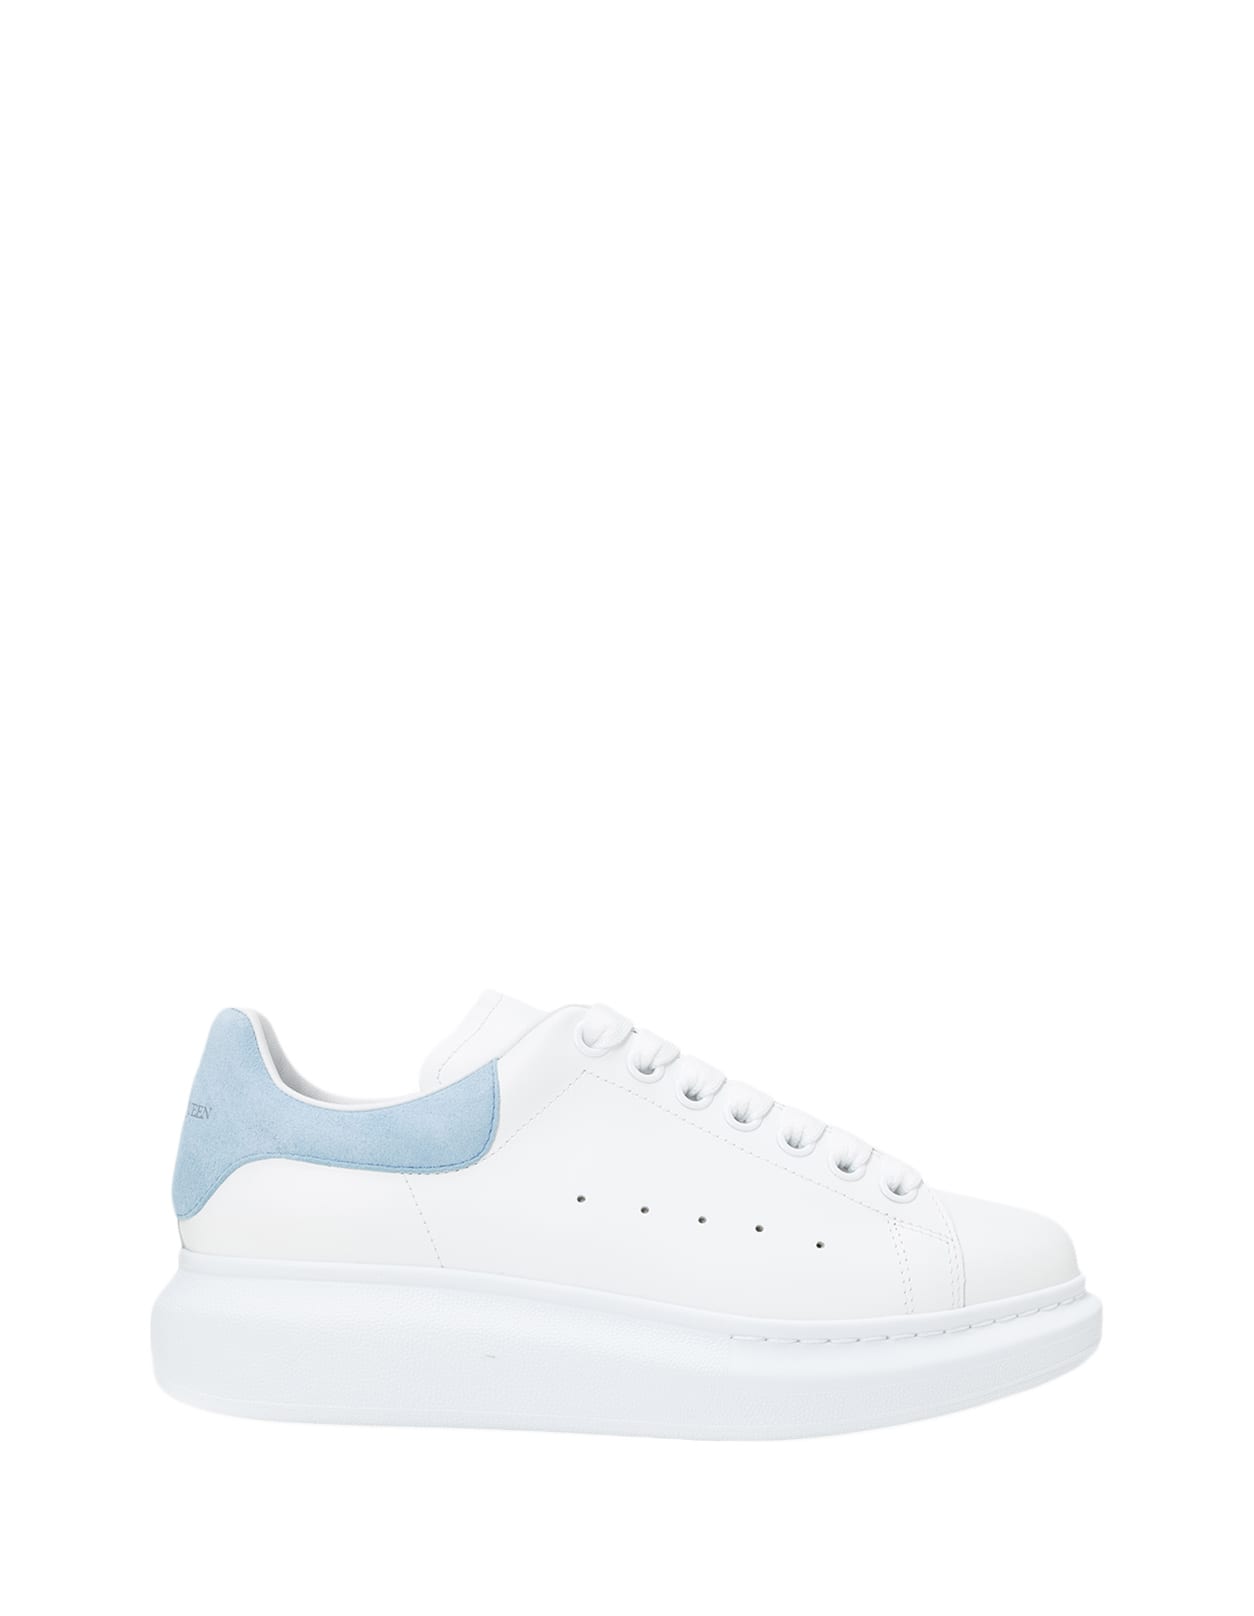 Shop Alexander Mcqueen White Oversized Sneakers With Powder Blue Suede Spoiler